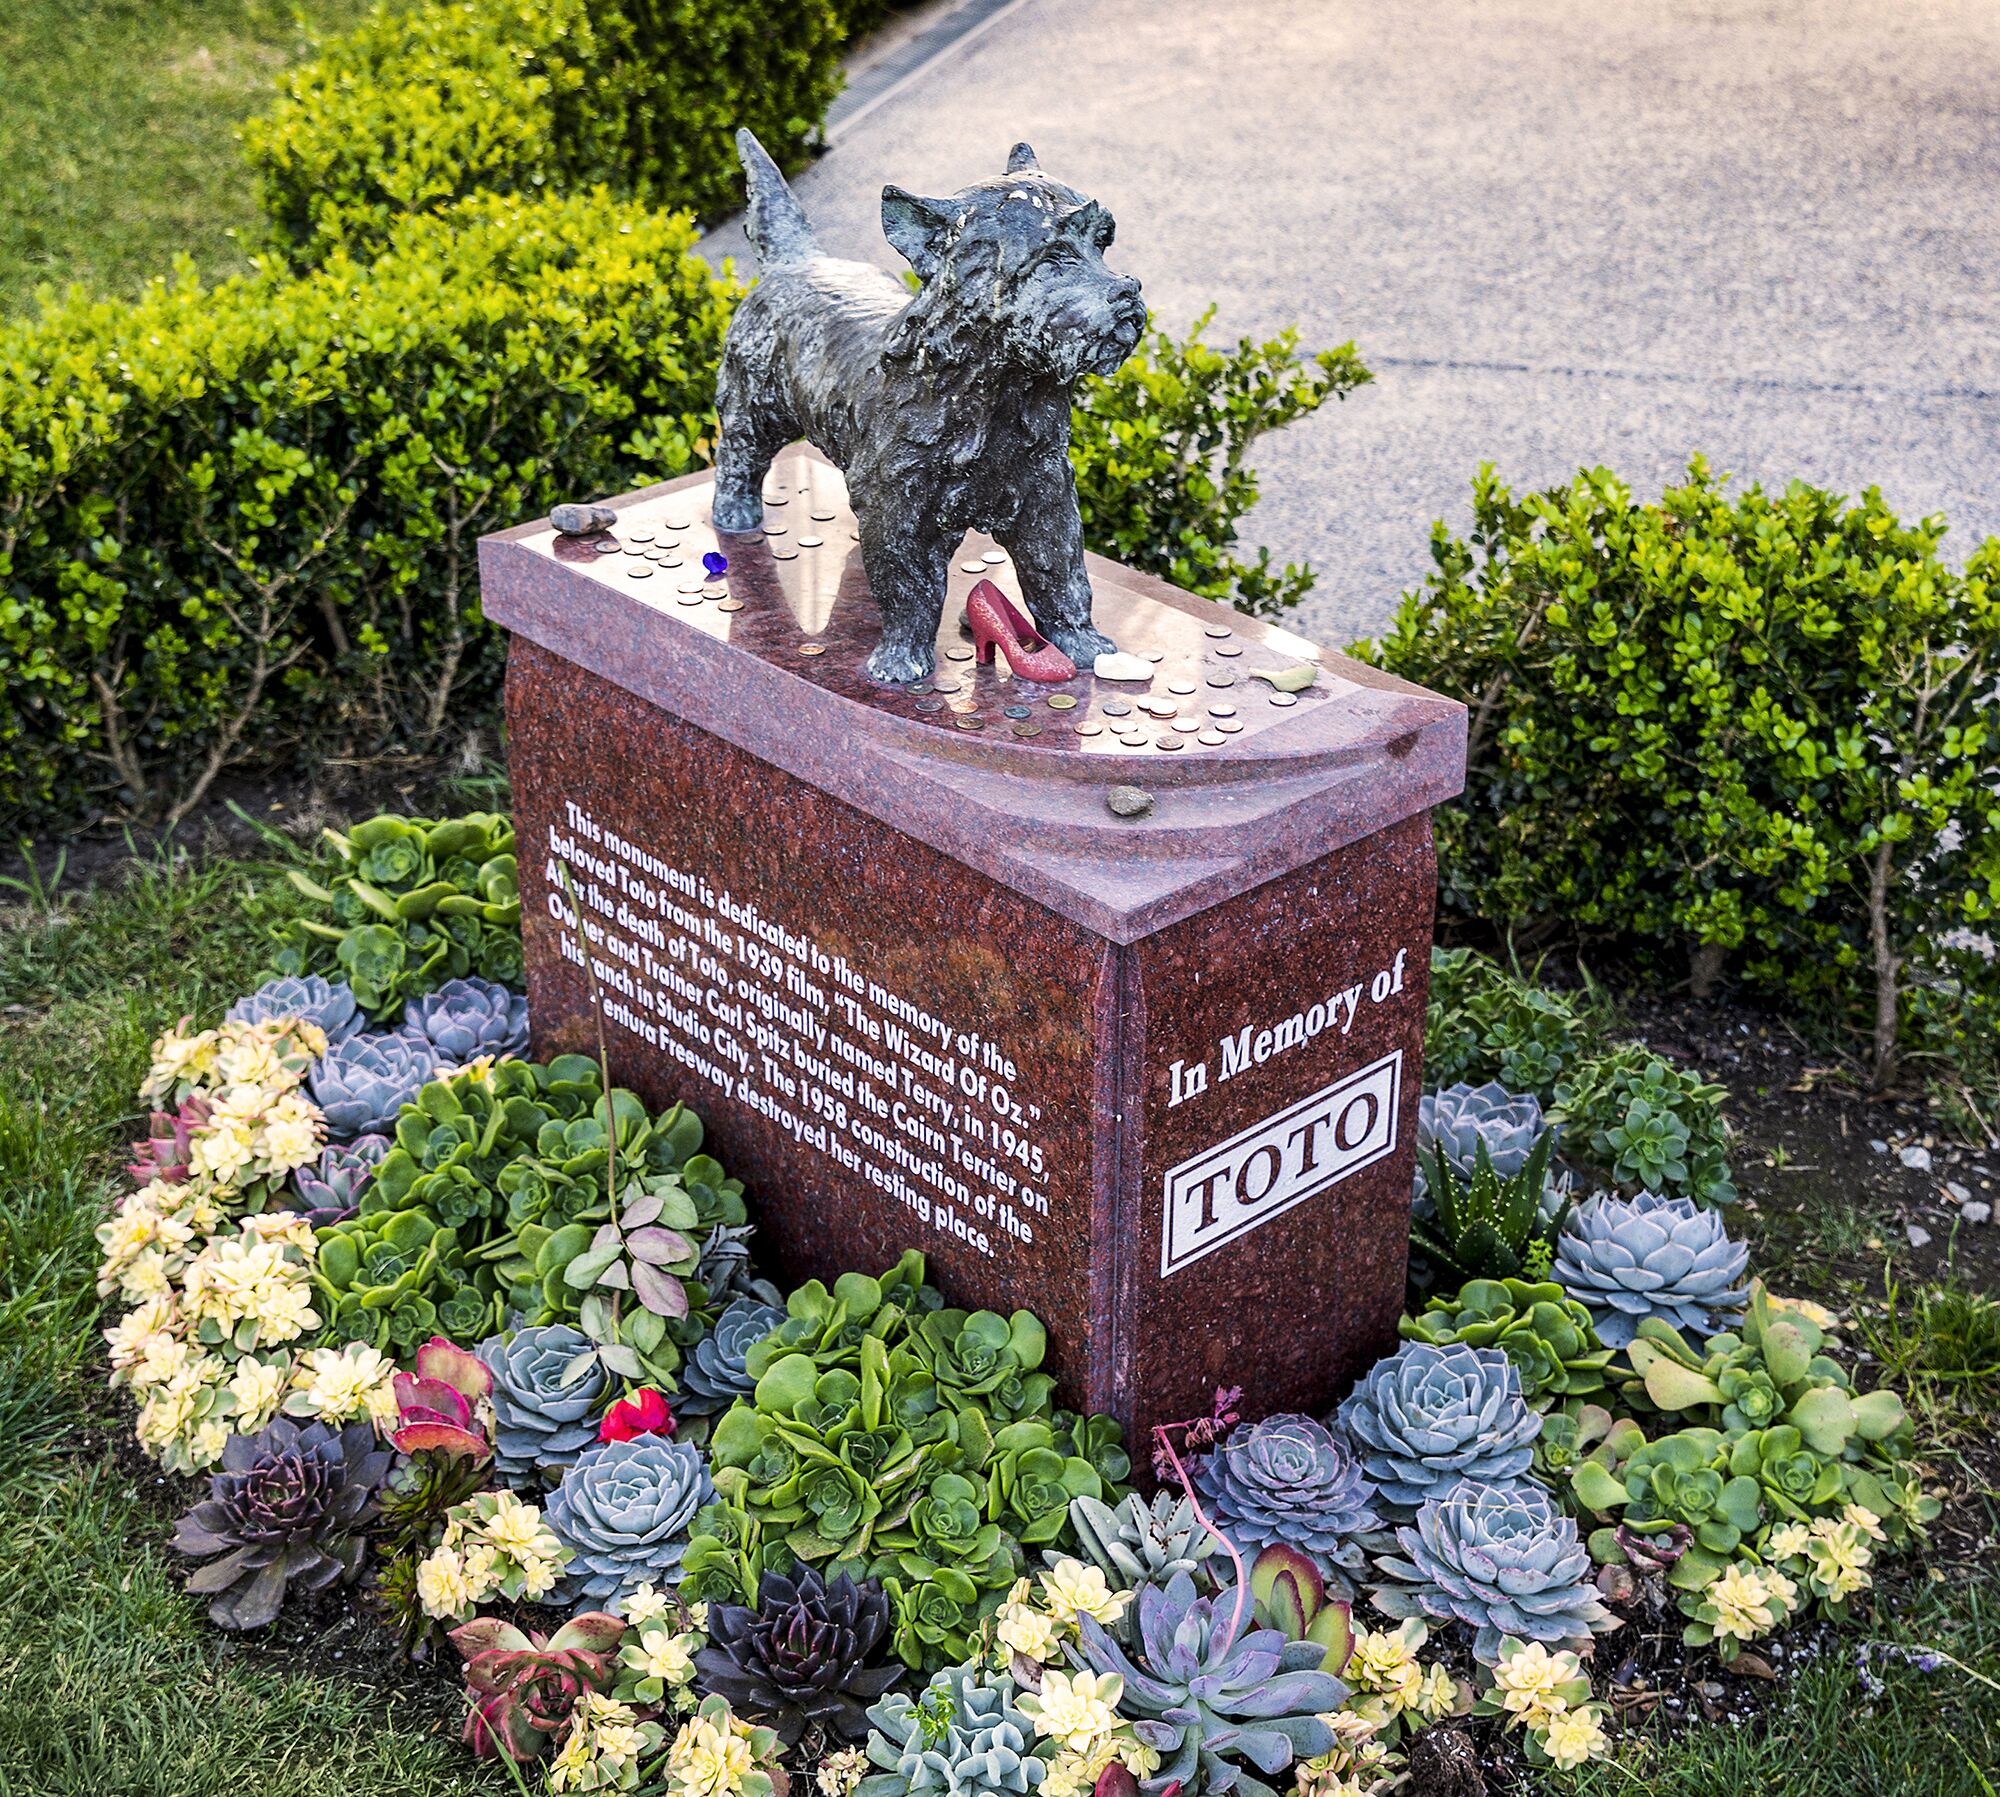 Toto's memorial at Hollywood Forever Cemetery.